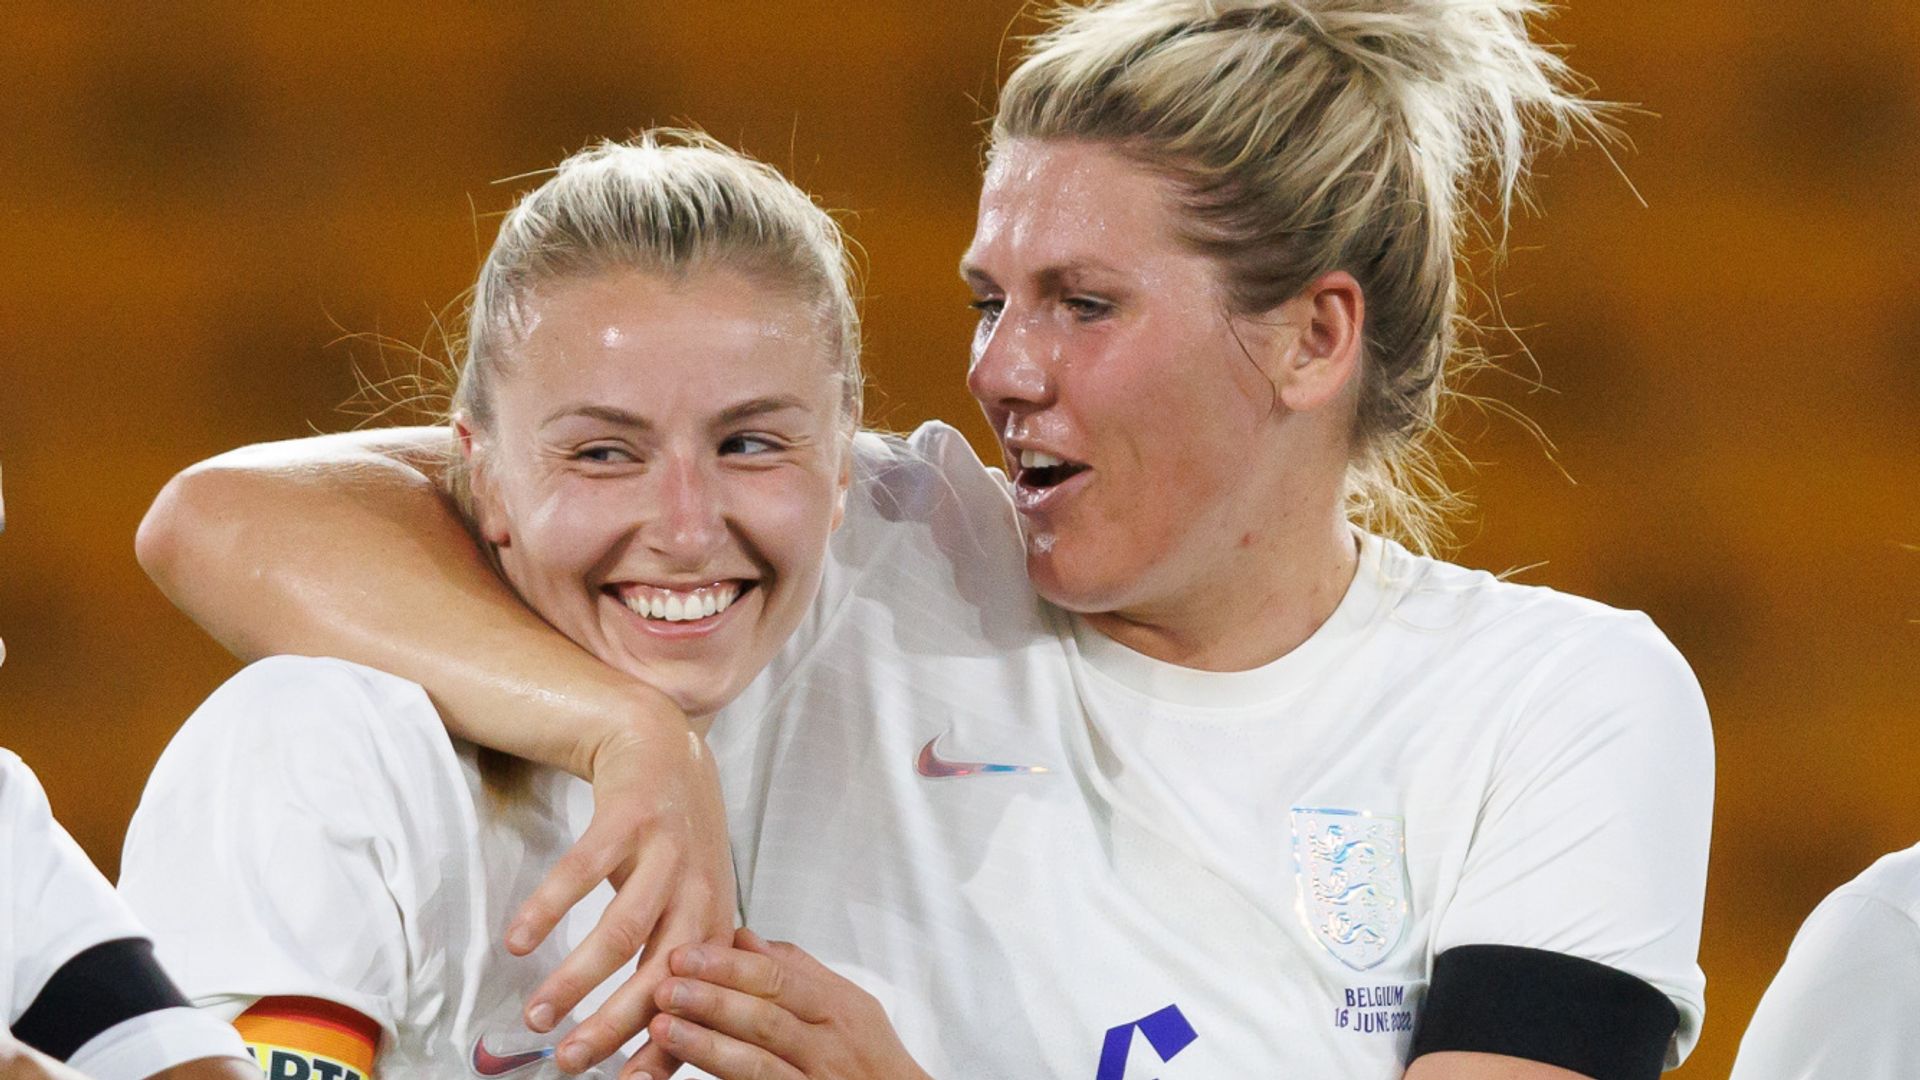 England 3-0 Belgium: Lionesses cruise to victory over Red Flames in first friendly test